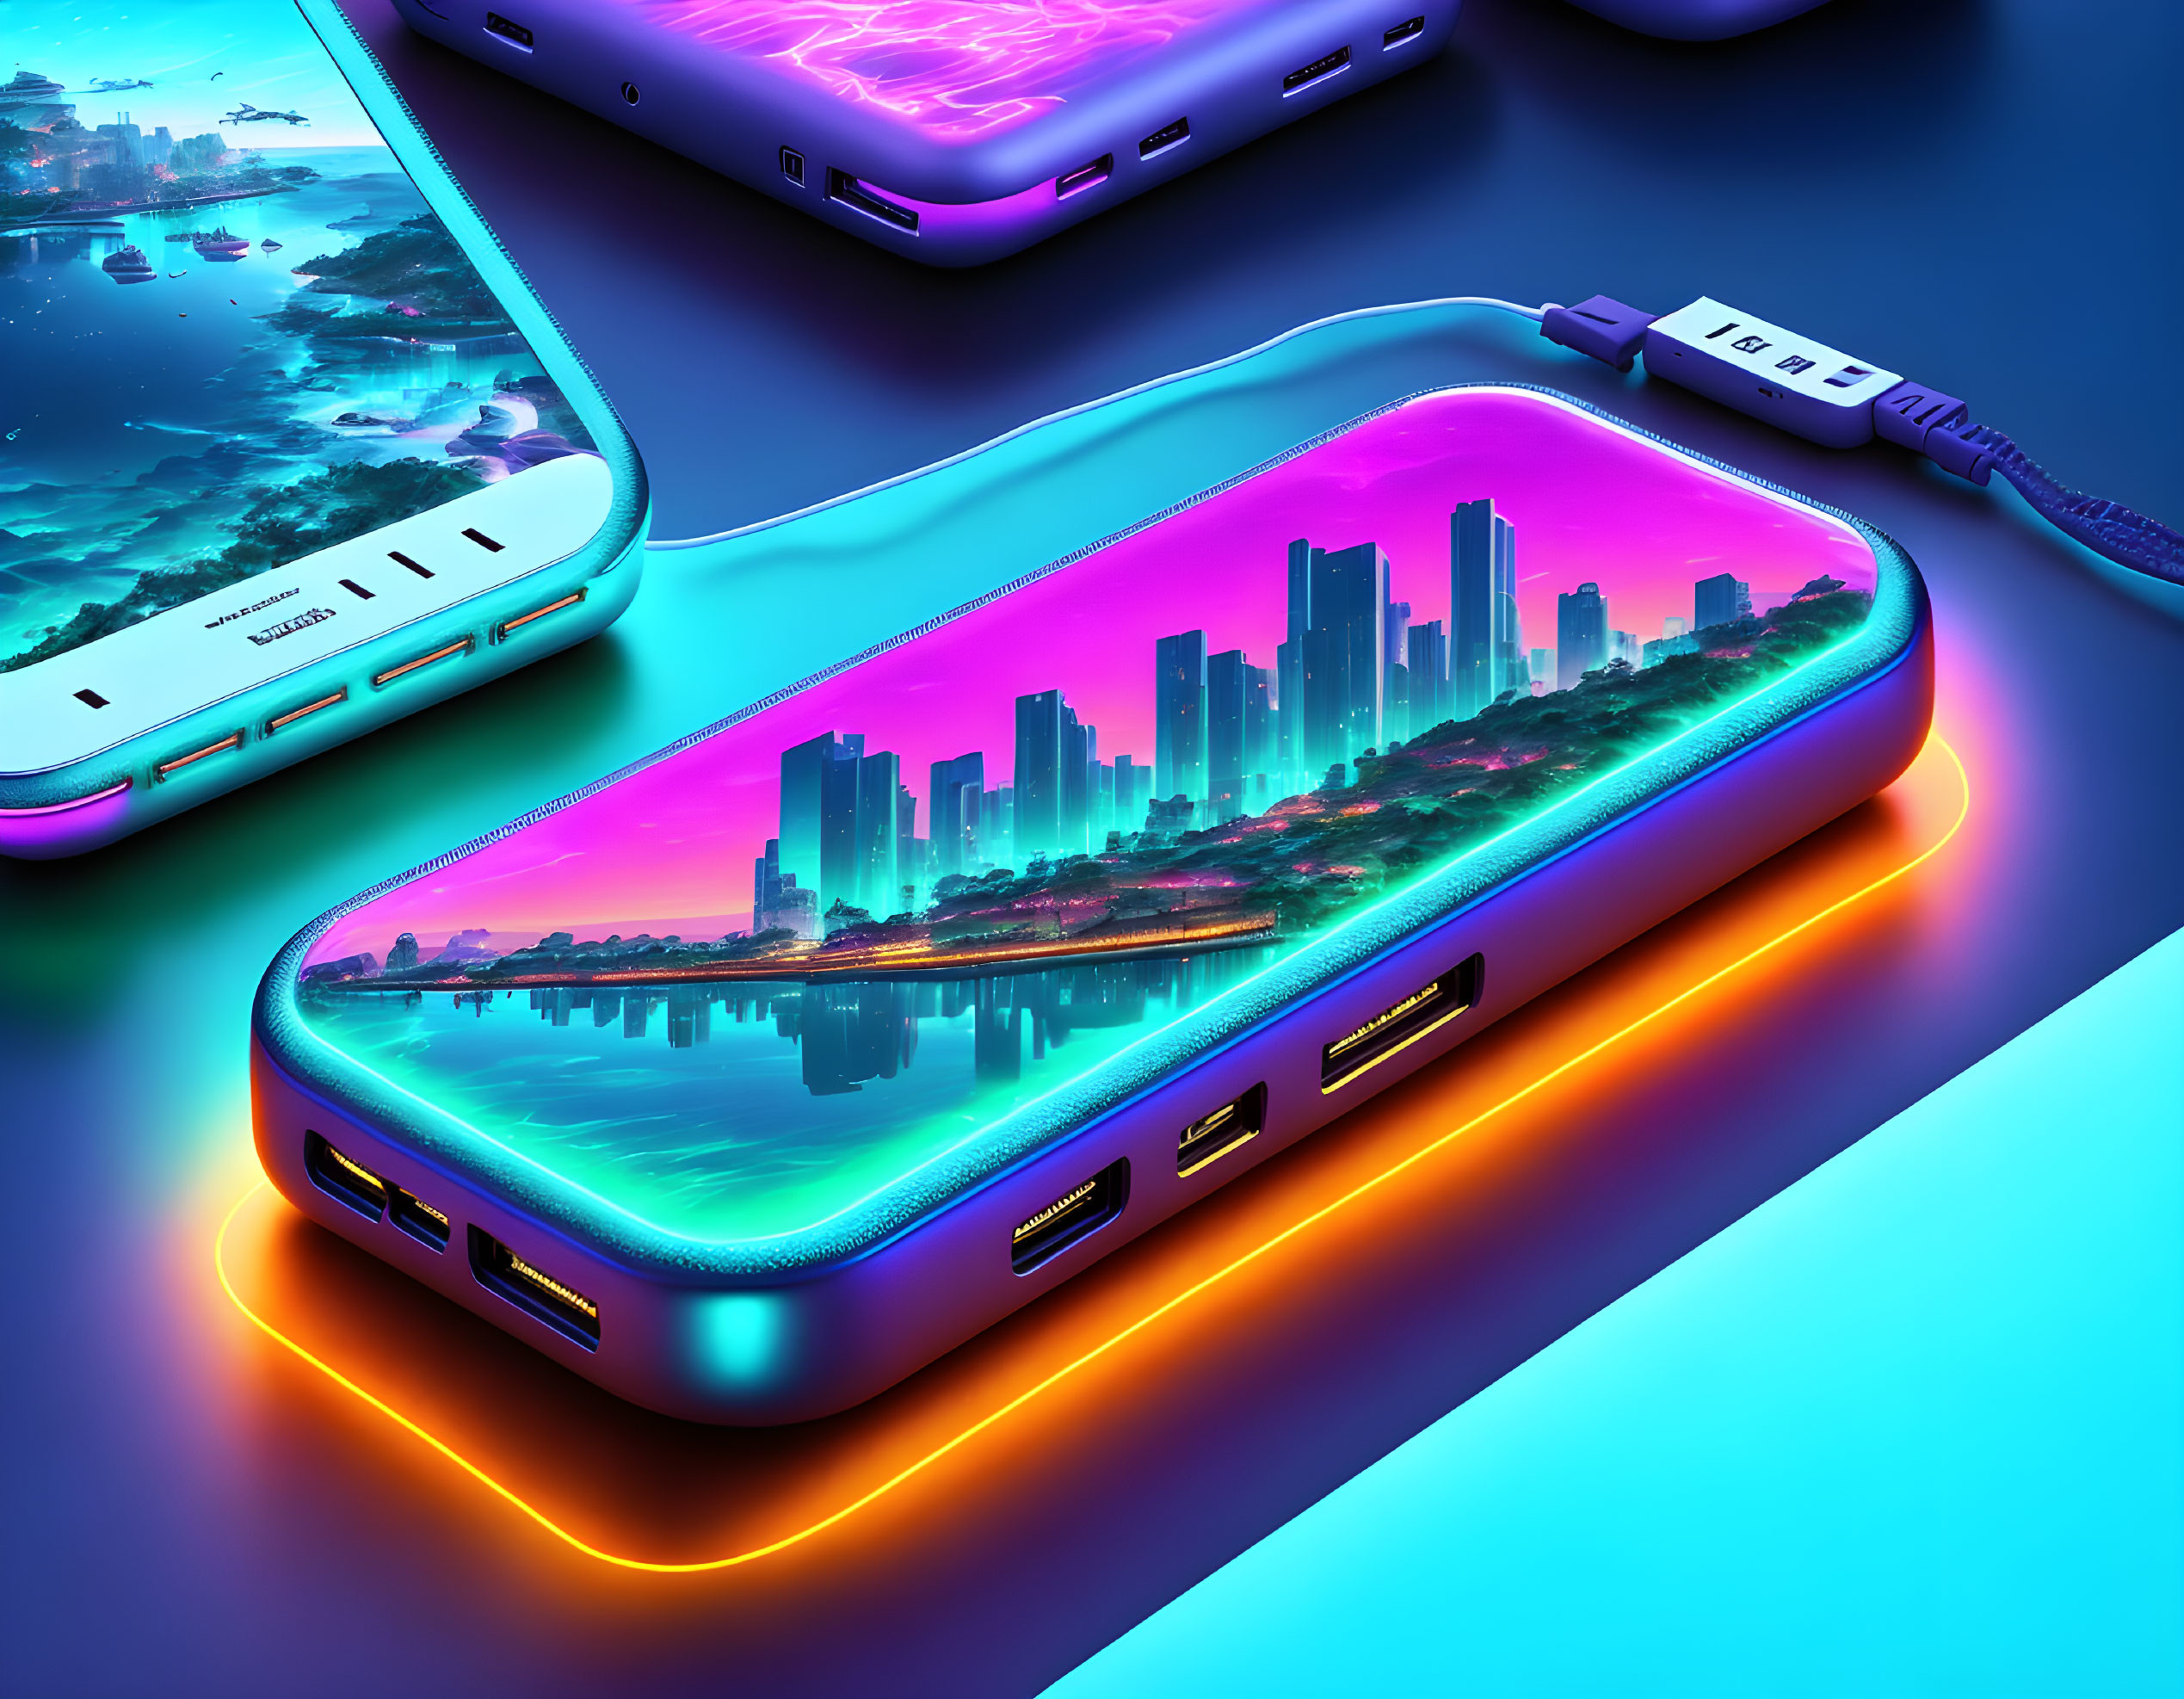 Neon-lit USB hubs with virtual cityscape reflection on vibrant background